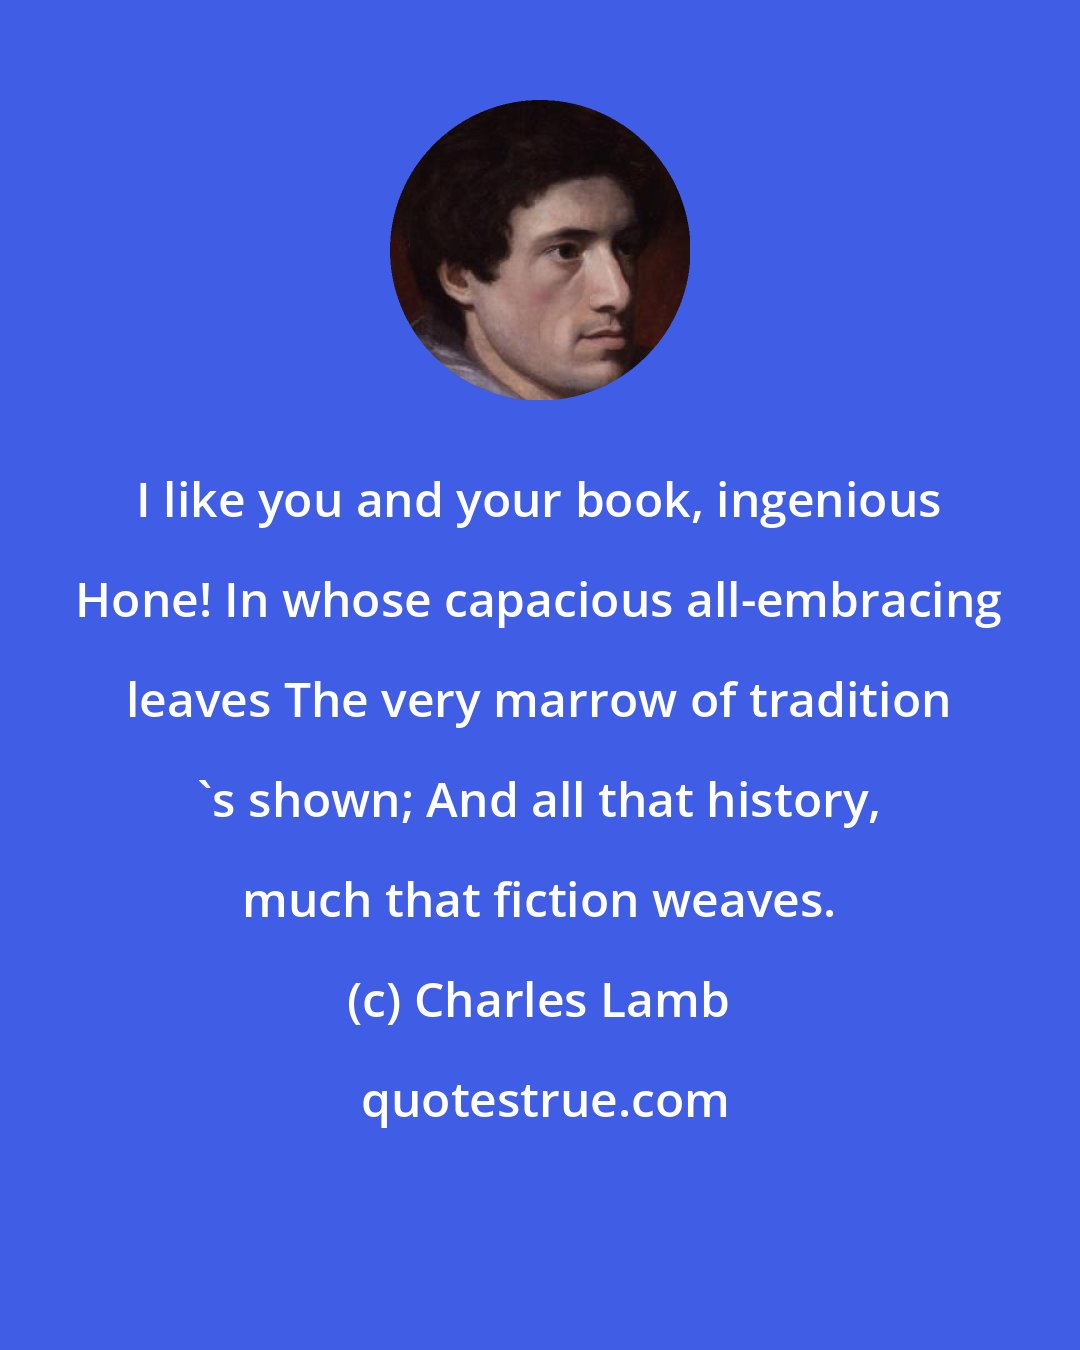 Charles Lamb: I like you and your book, ingenious Hone! In whose capacious all-embracing leaves The very marrow of tradition 's shown; And all that history, much that fiction weaves.